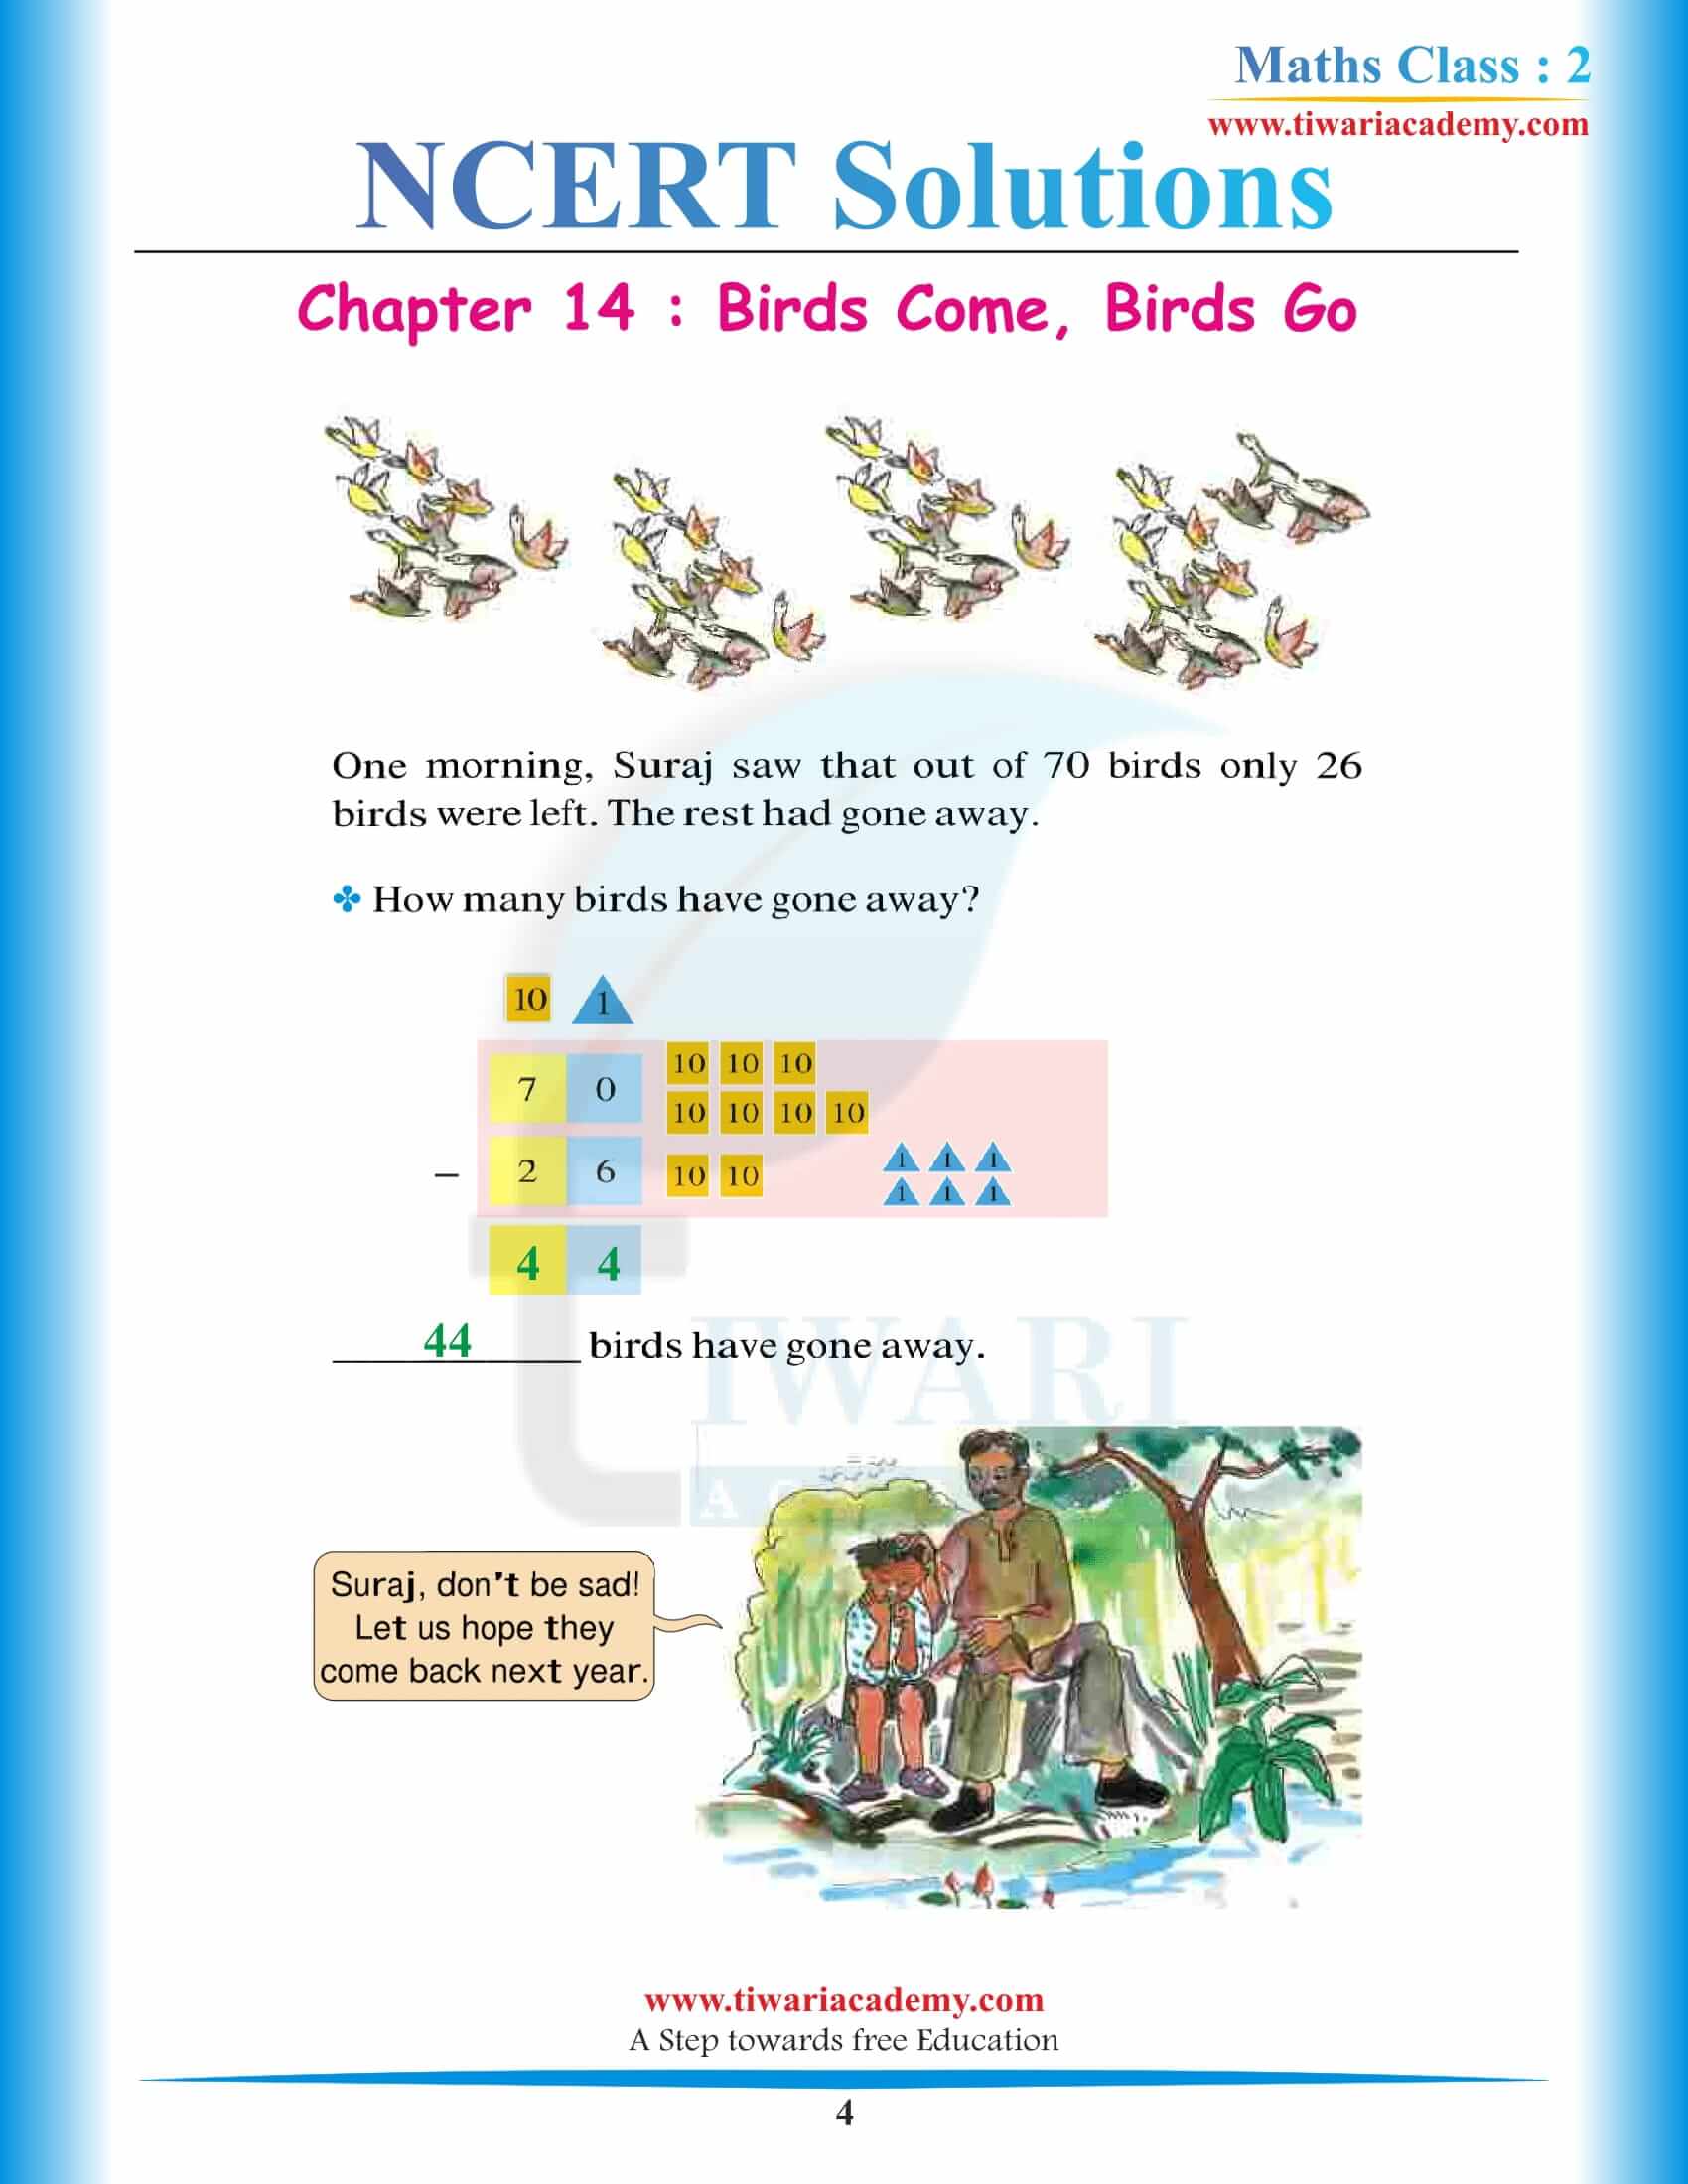 NCERT Solutions for Class 2 Maths Chapter 14 in Hindi